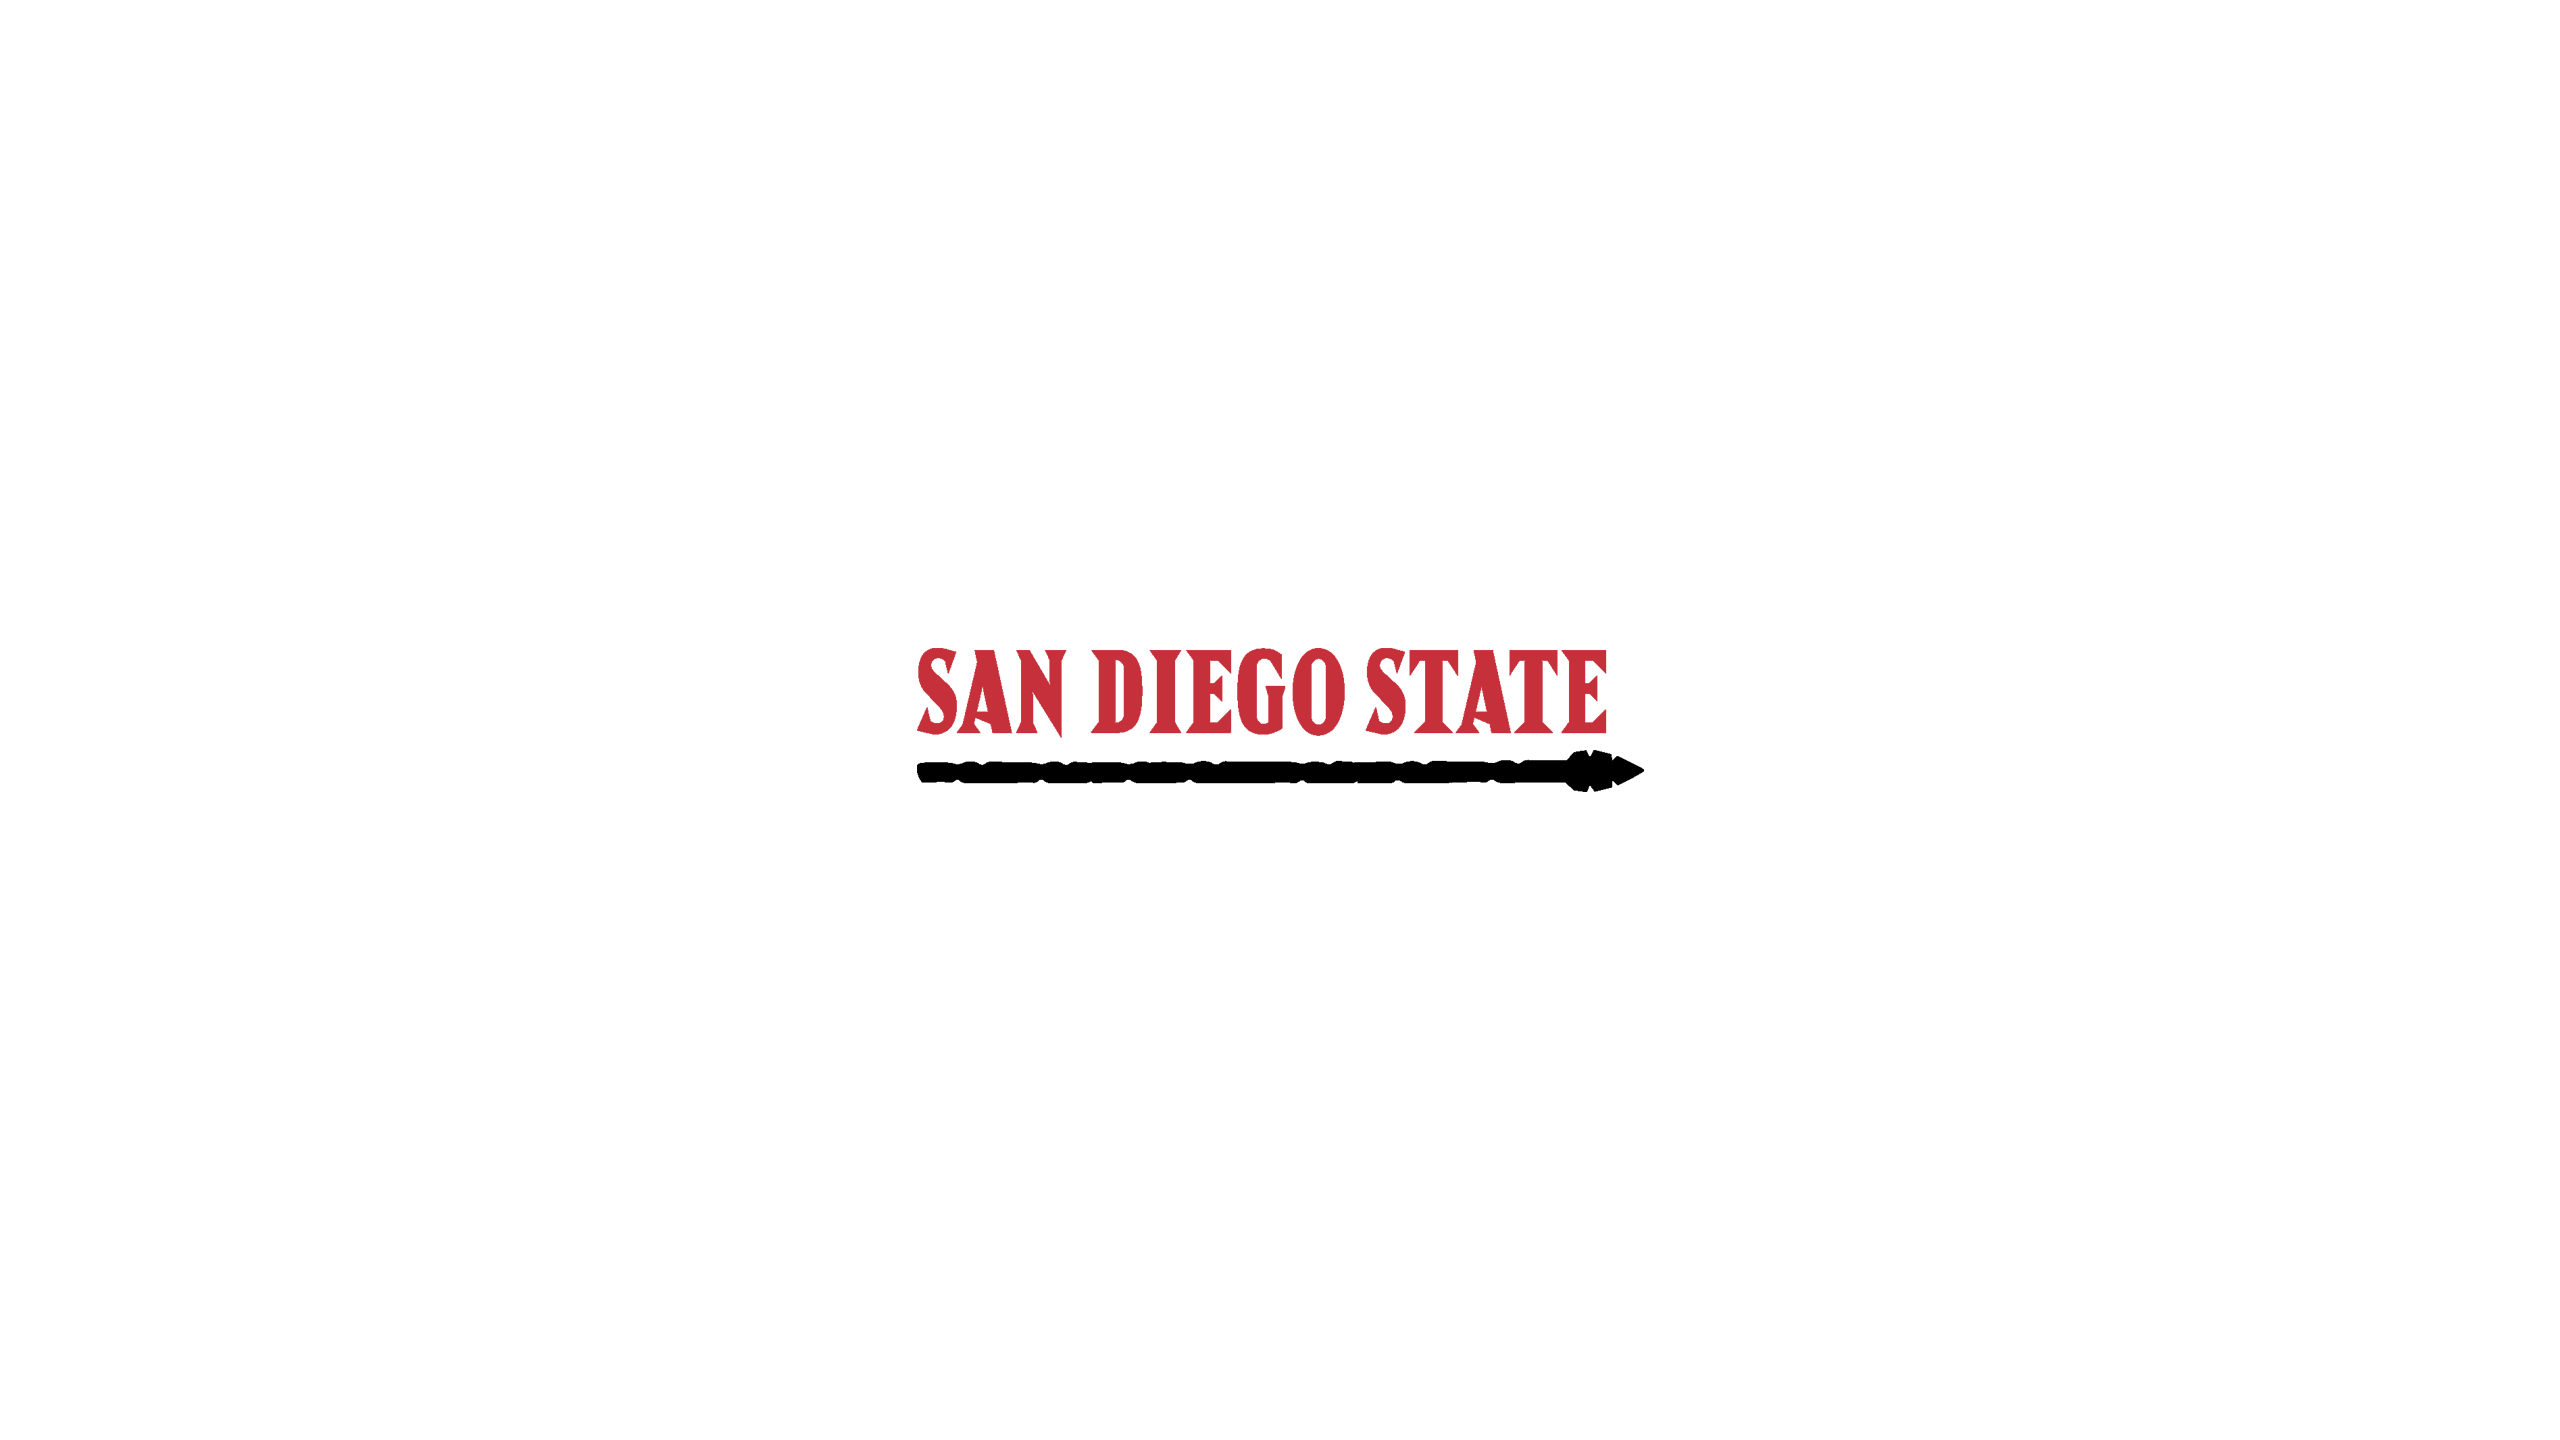 San Diego State Aztecs Football - NCAAF - Square Bettor